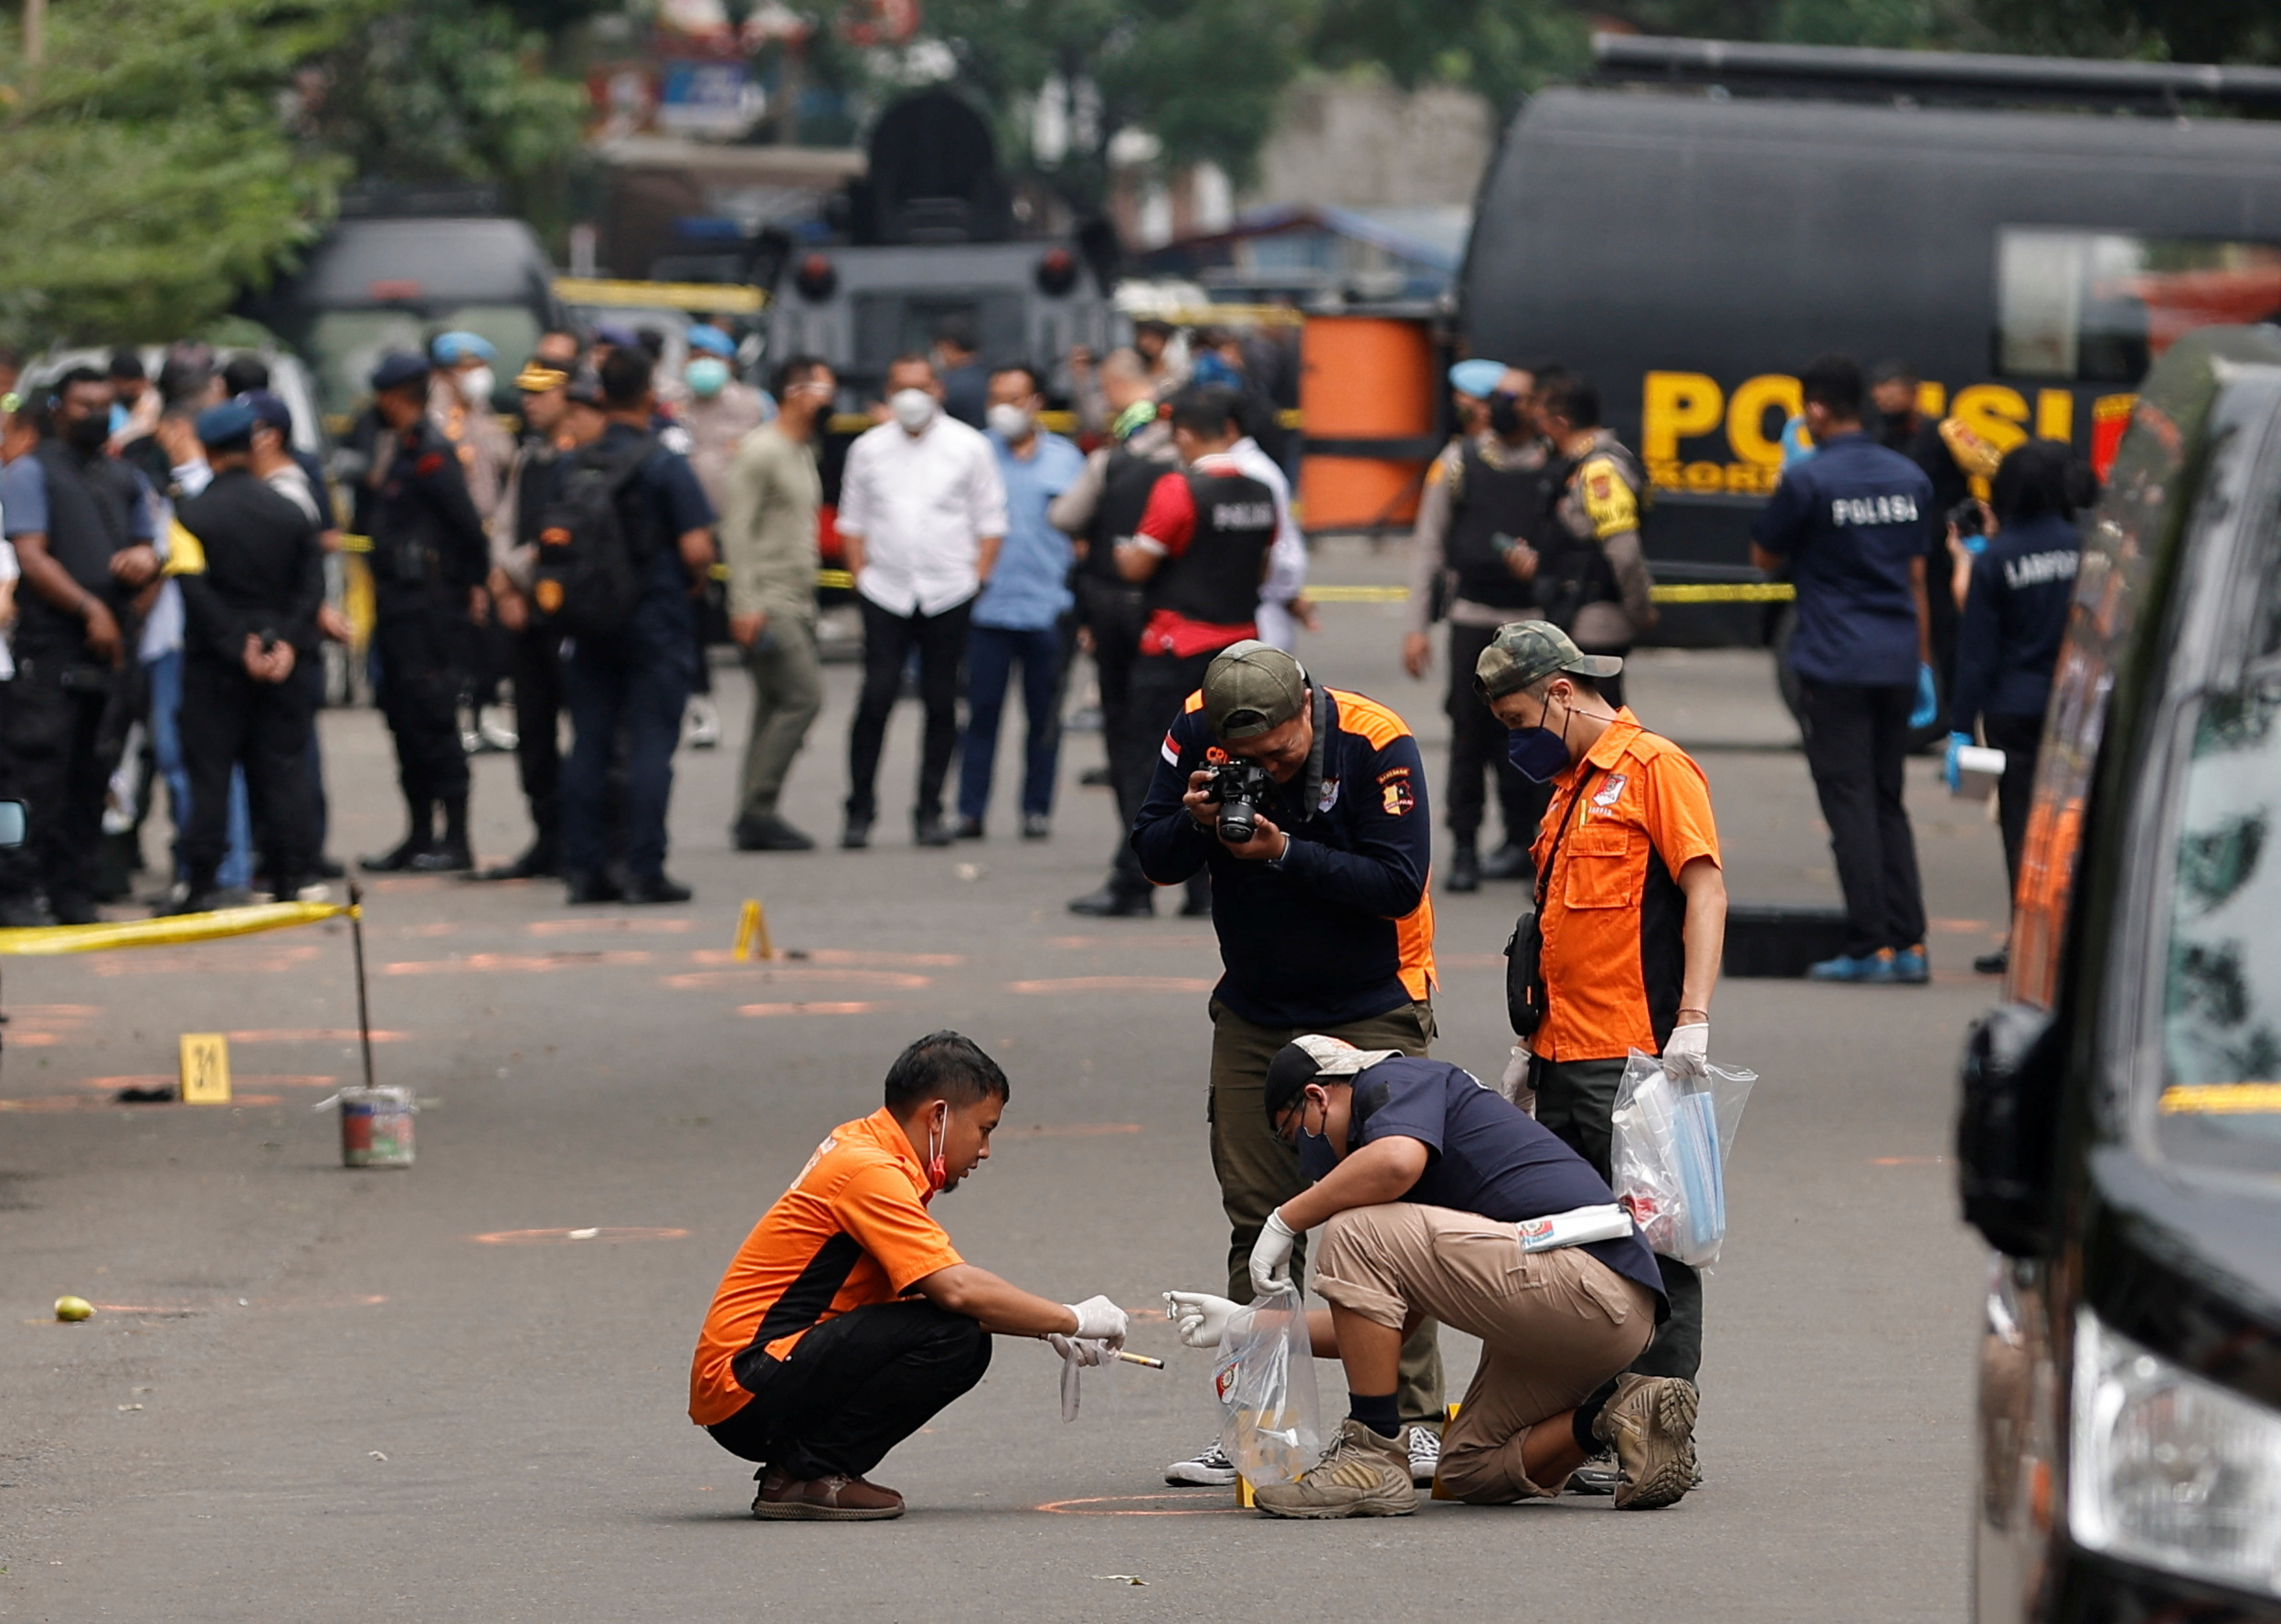 The aftermath of an explosion at a district police station in Bandung